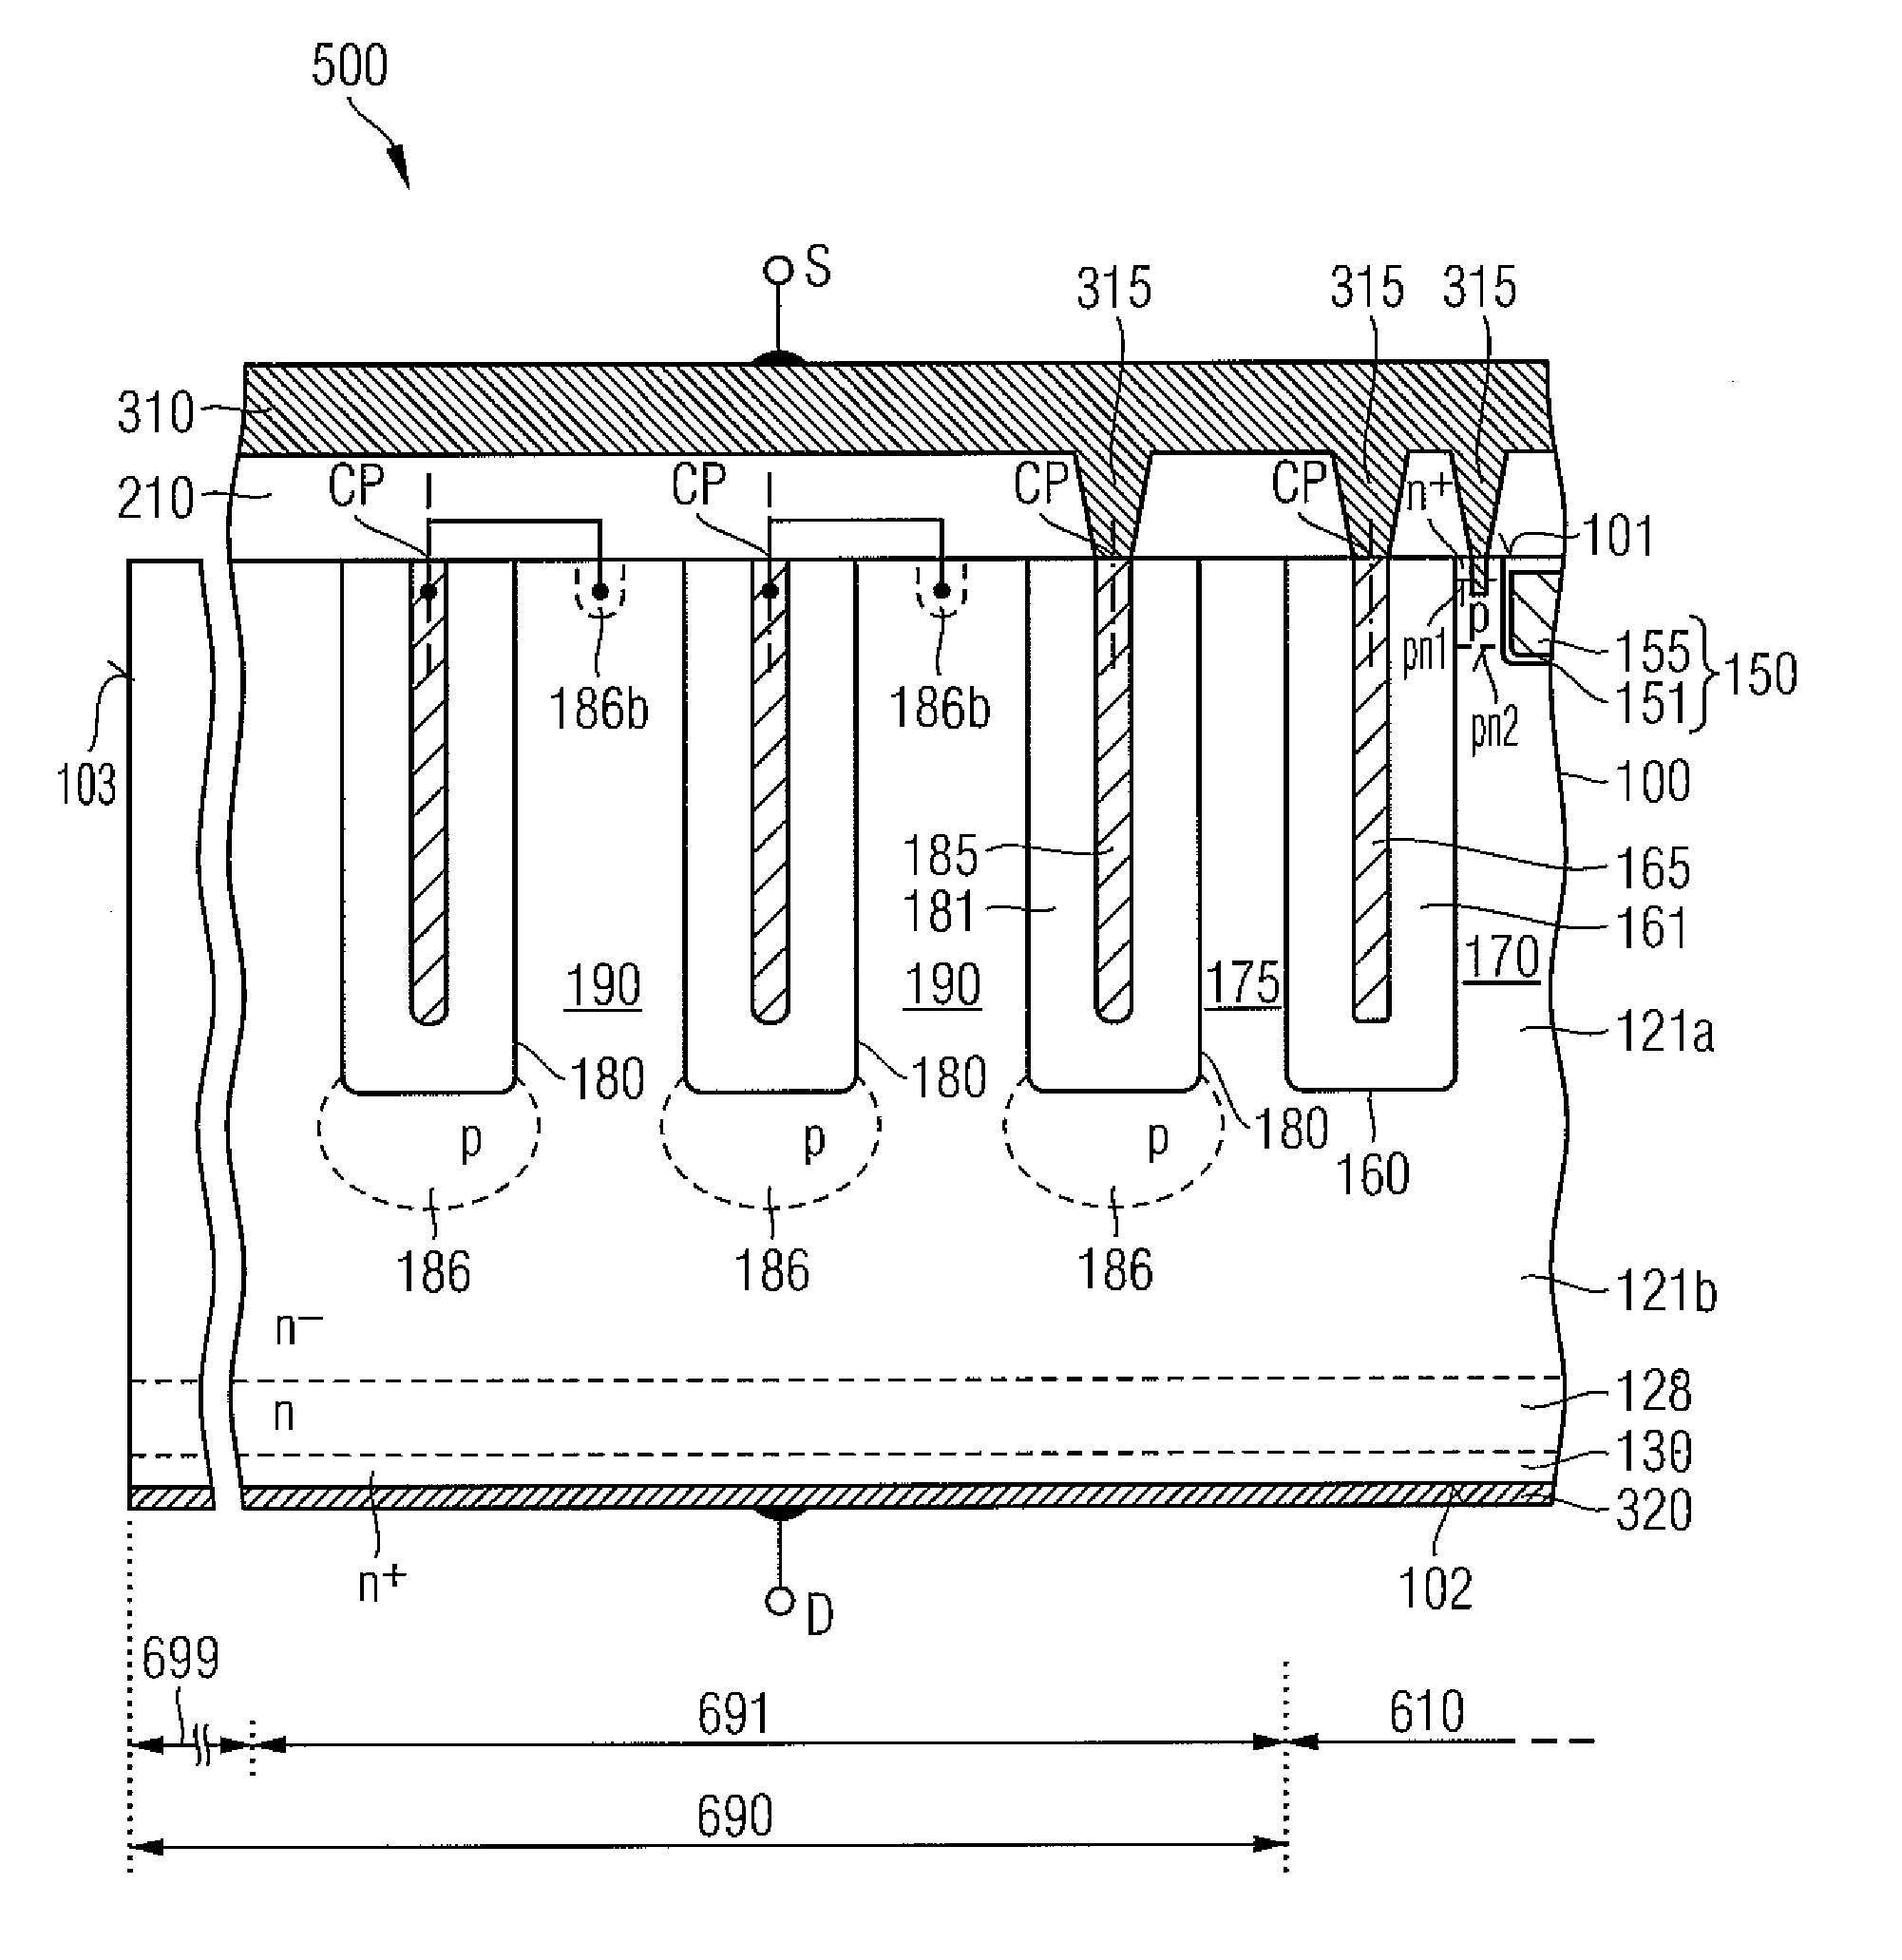 Semiconductor Device with Field Electrode Structures in a Cell Area and Termination Structures in an Edge Area